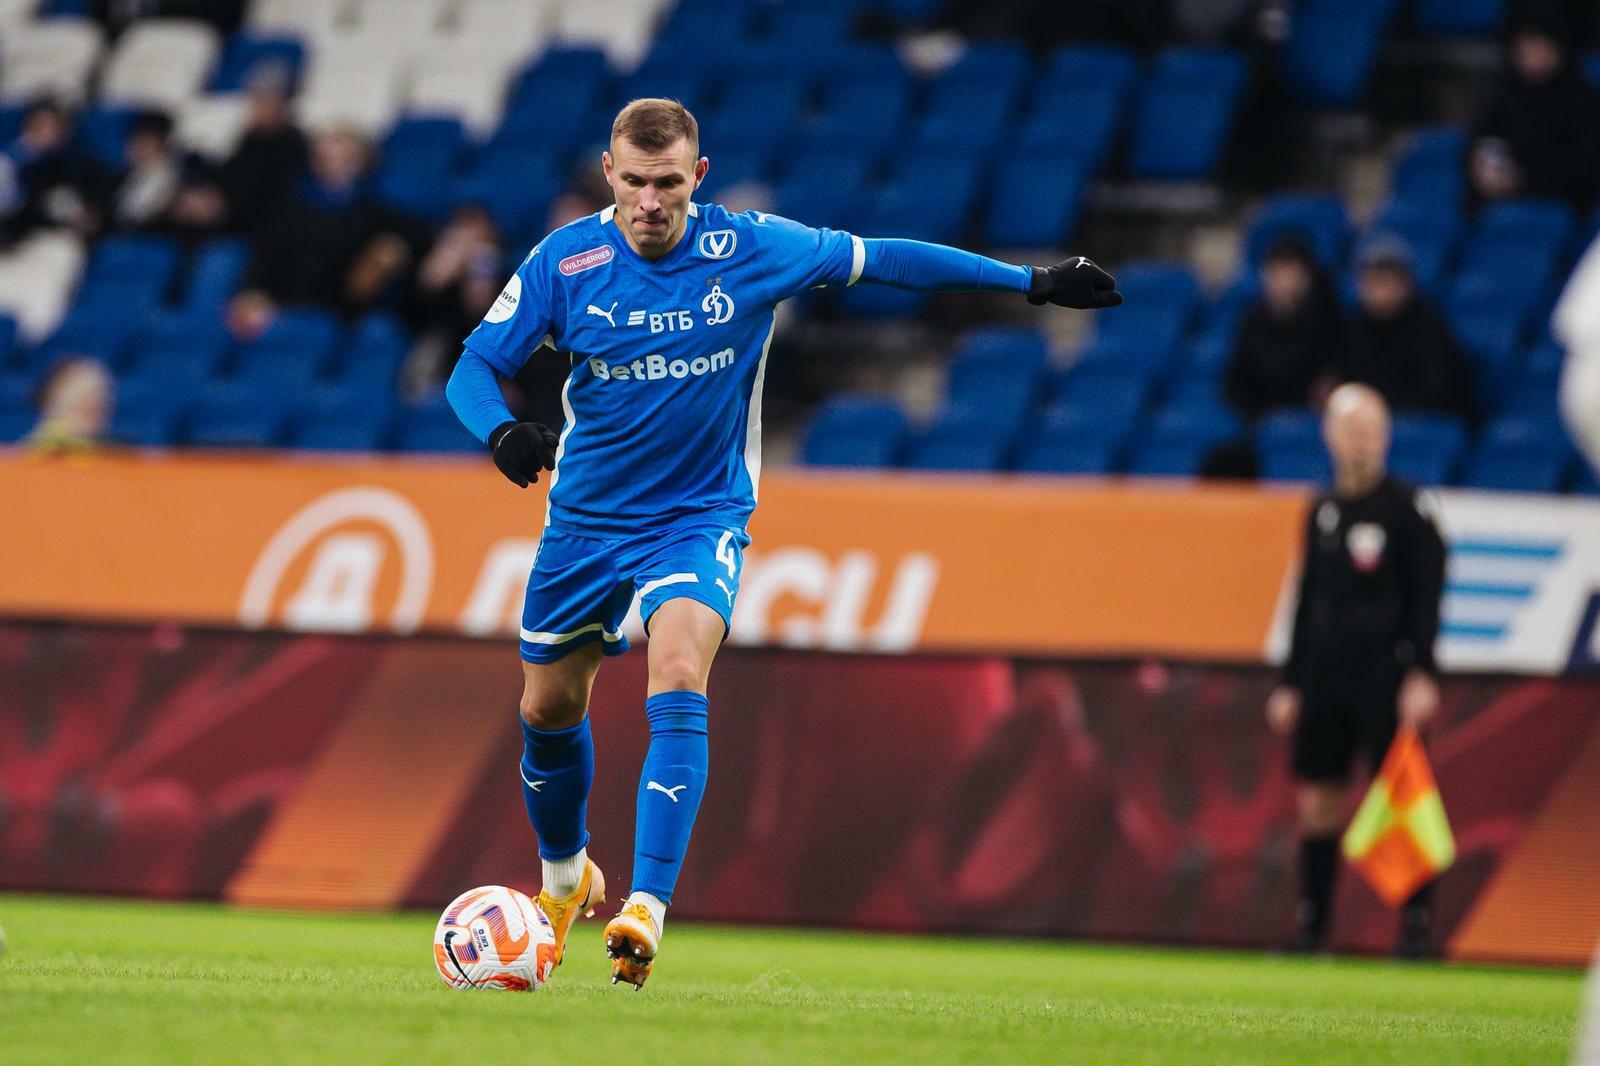 FC Dynamo Moscow News | Sergey Parshivlyuk: "We have team faith in each other and a positive result." Official Dynamo Club Website.